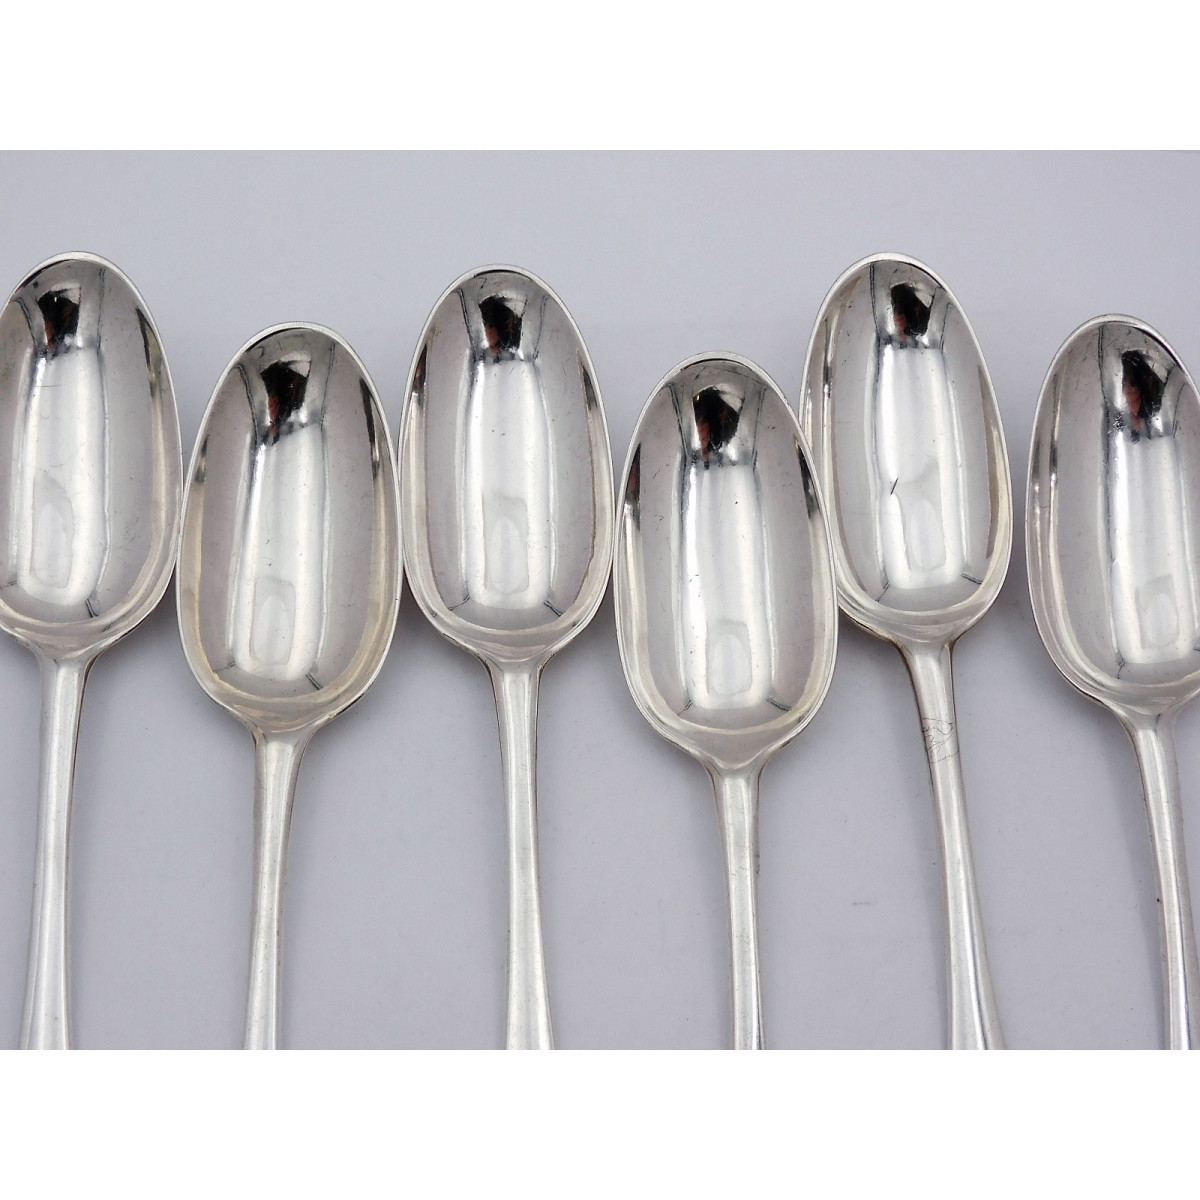 6 Silver Table Spoons, 1732 by Joseph Smith » Antique Silver Spoons